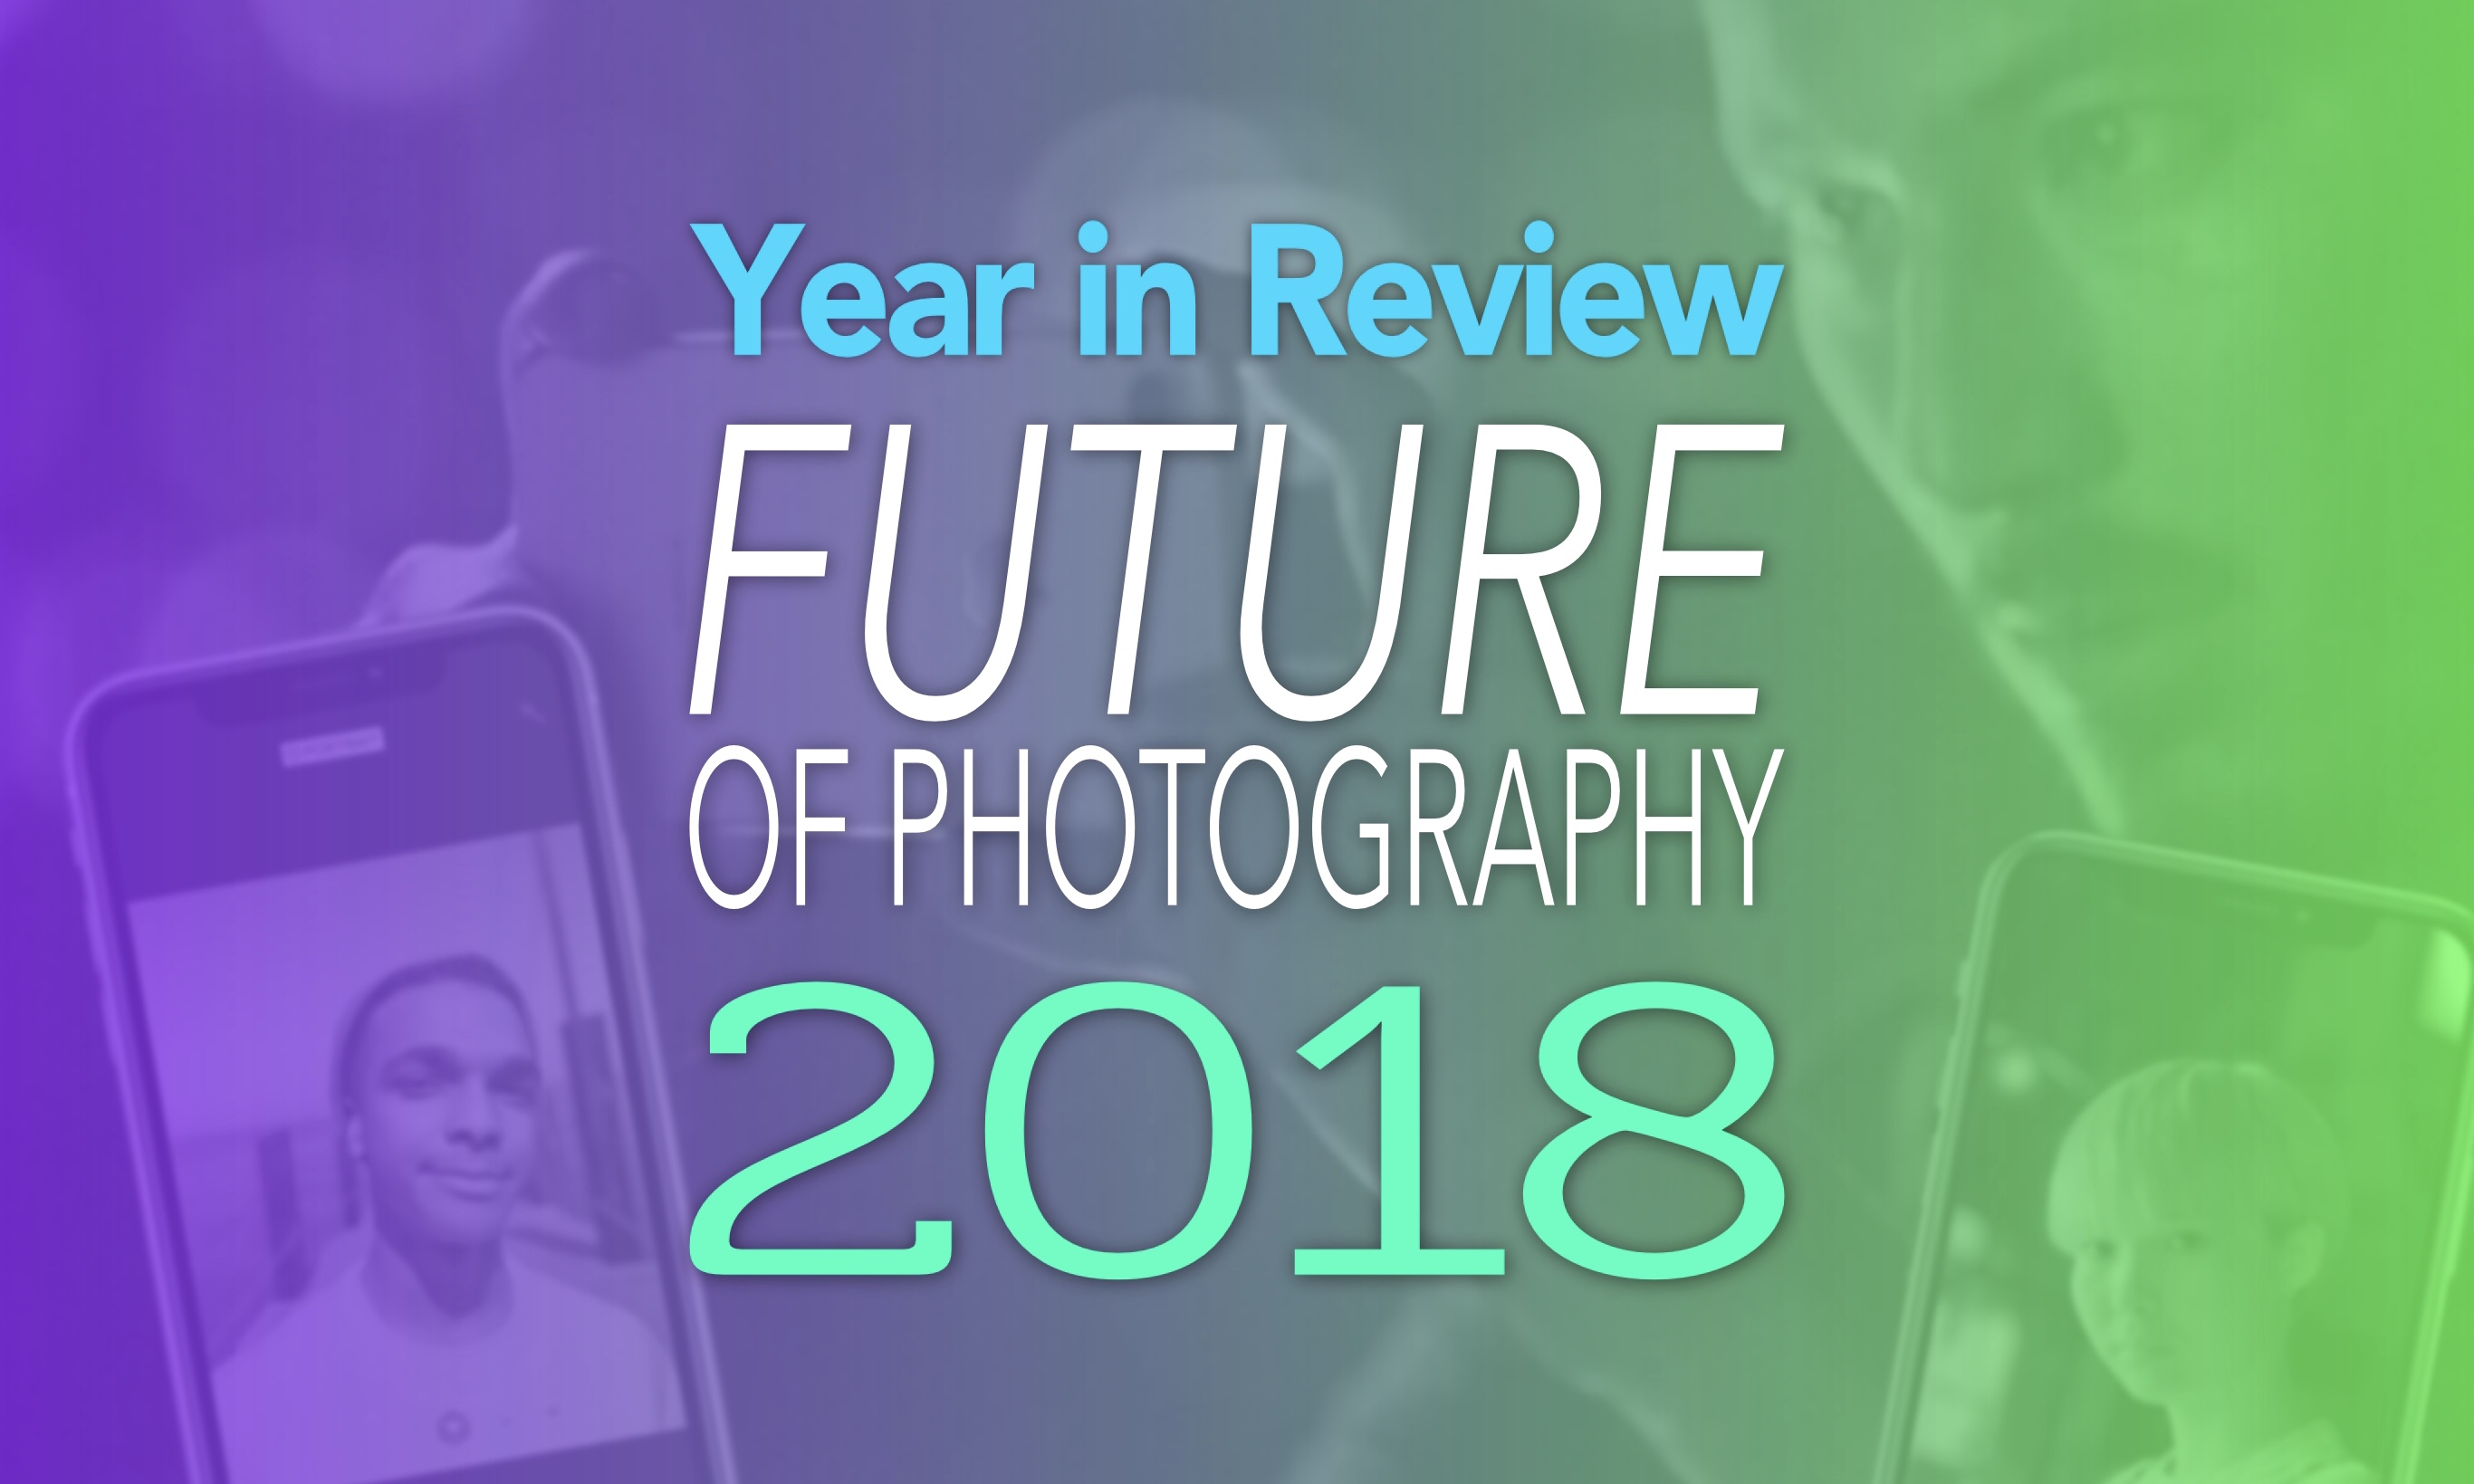 Year in Review Future of Photography 2018